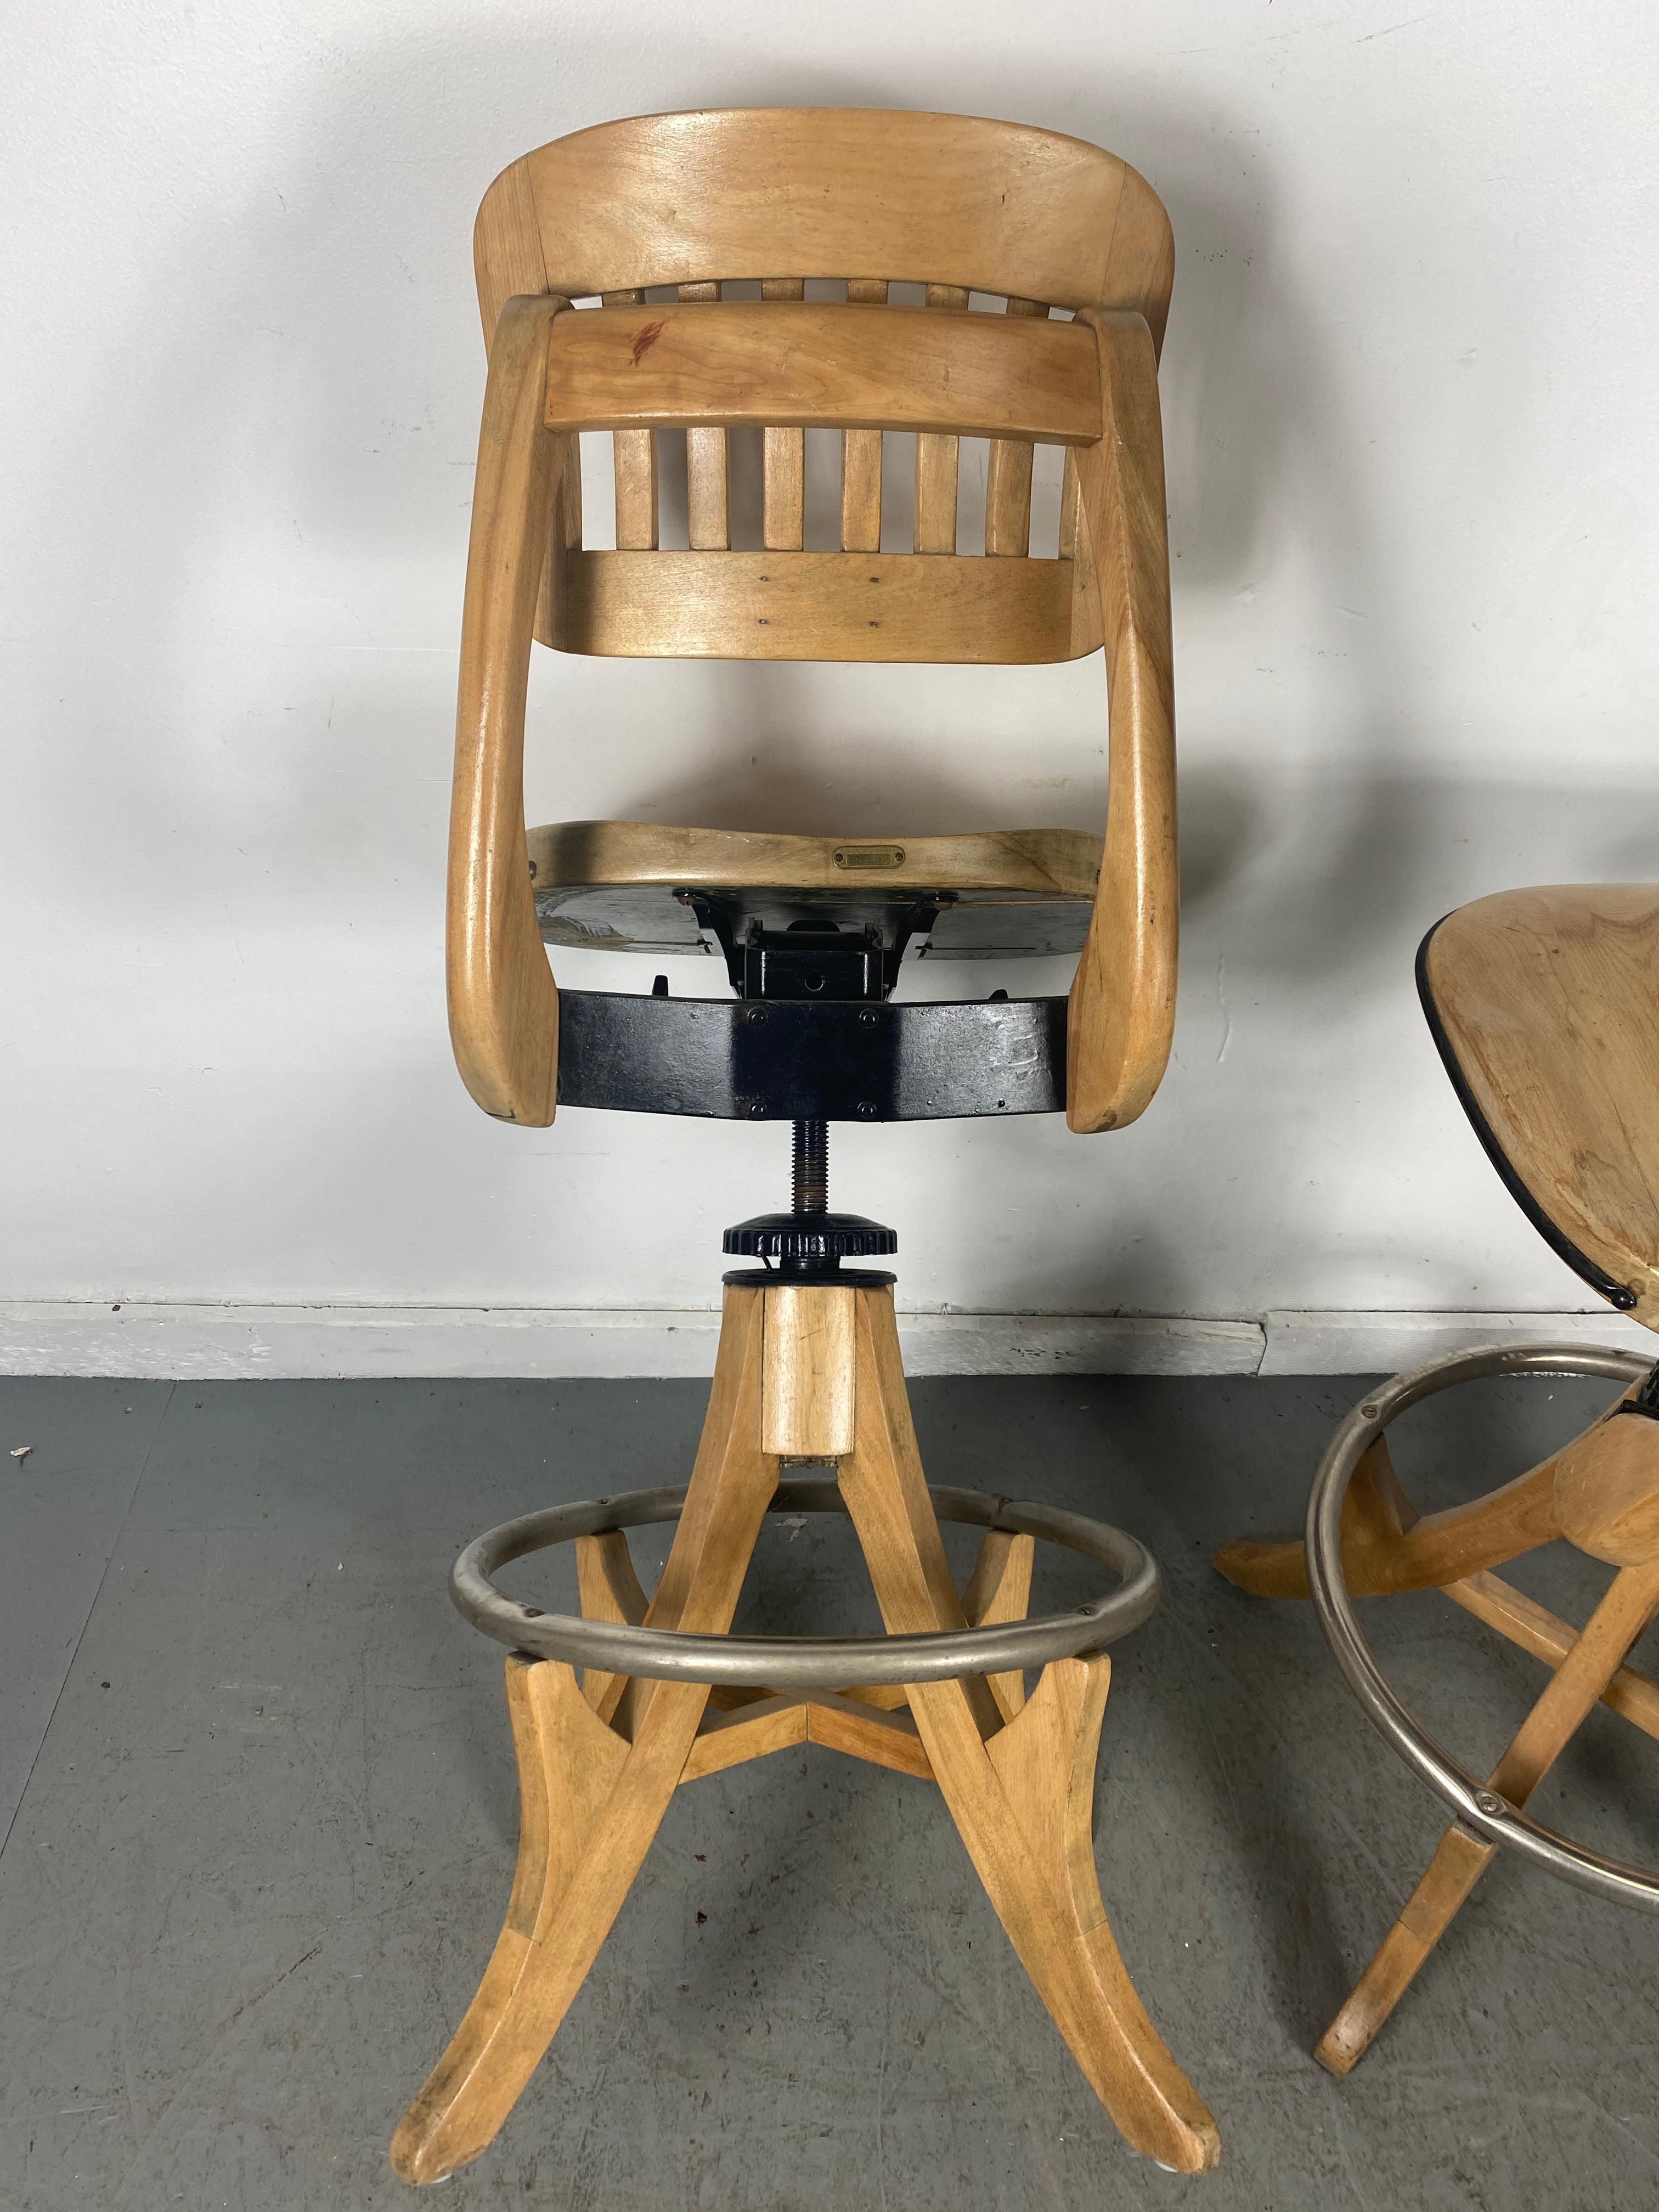 Mid-20th Century Antique Industrial Drafting Stool, Bar/ Counter by Sikes Chair Co. Buffalo